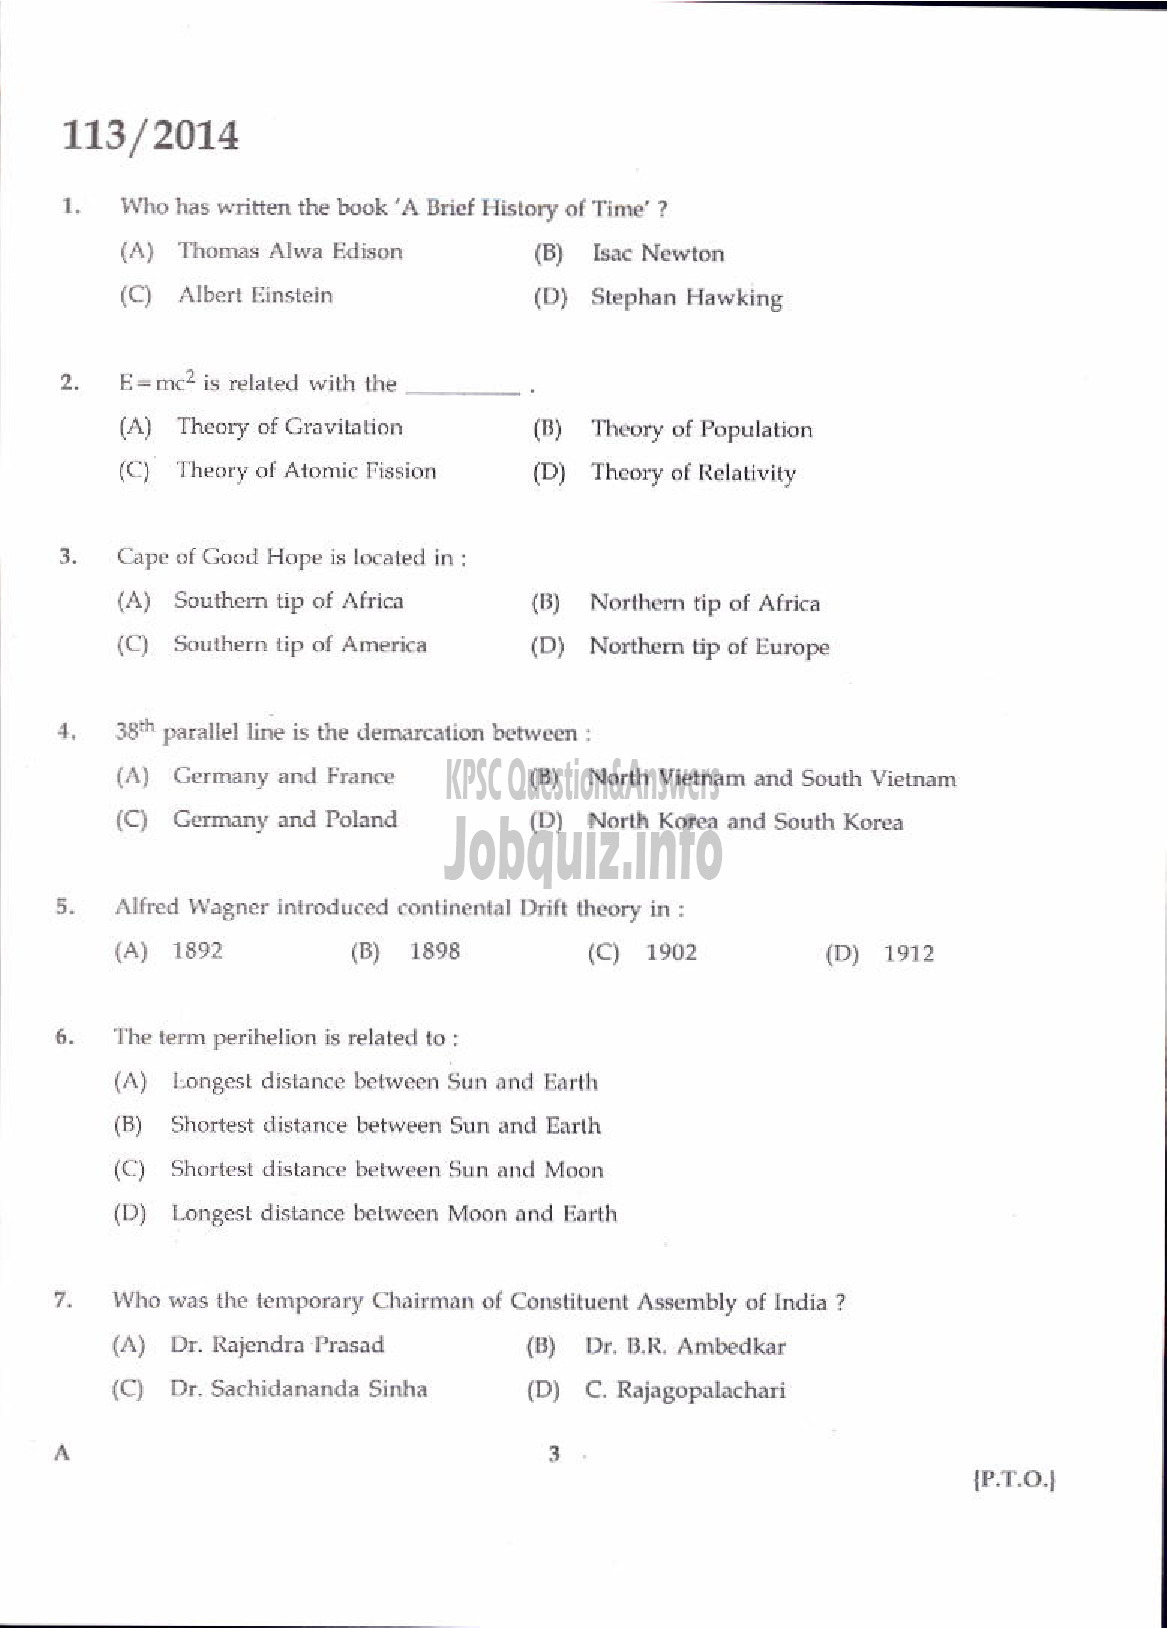 Kerala PSC Question Paper - DRUGS INSPECTOR AYURVEDA DRUGS CONTROL-1